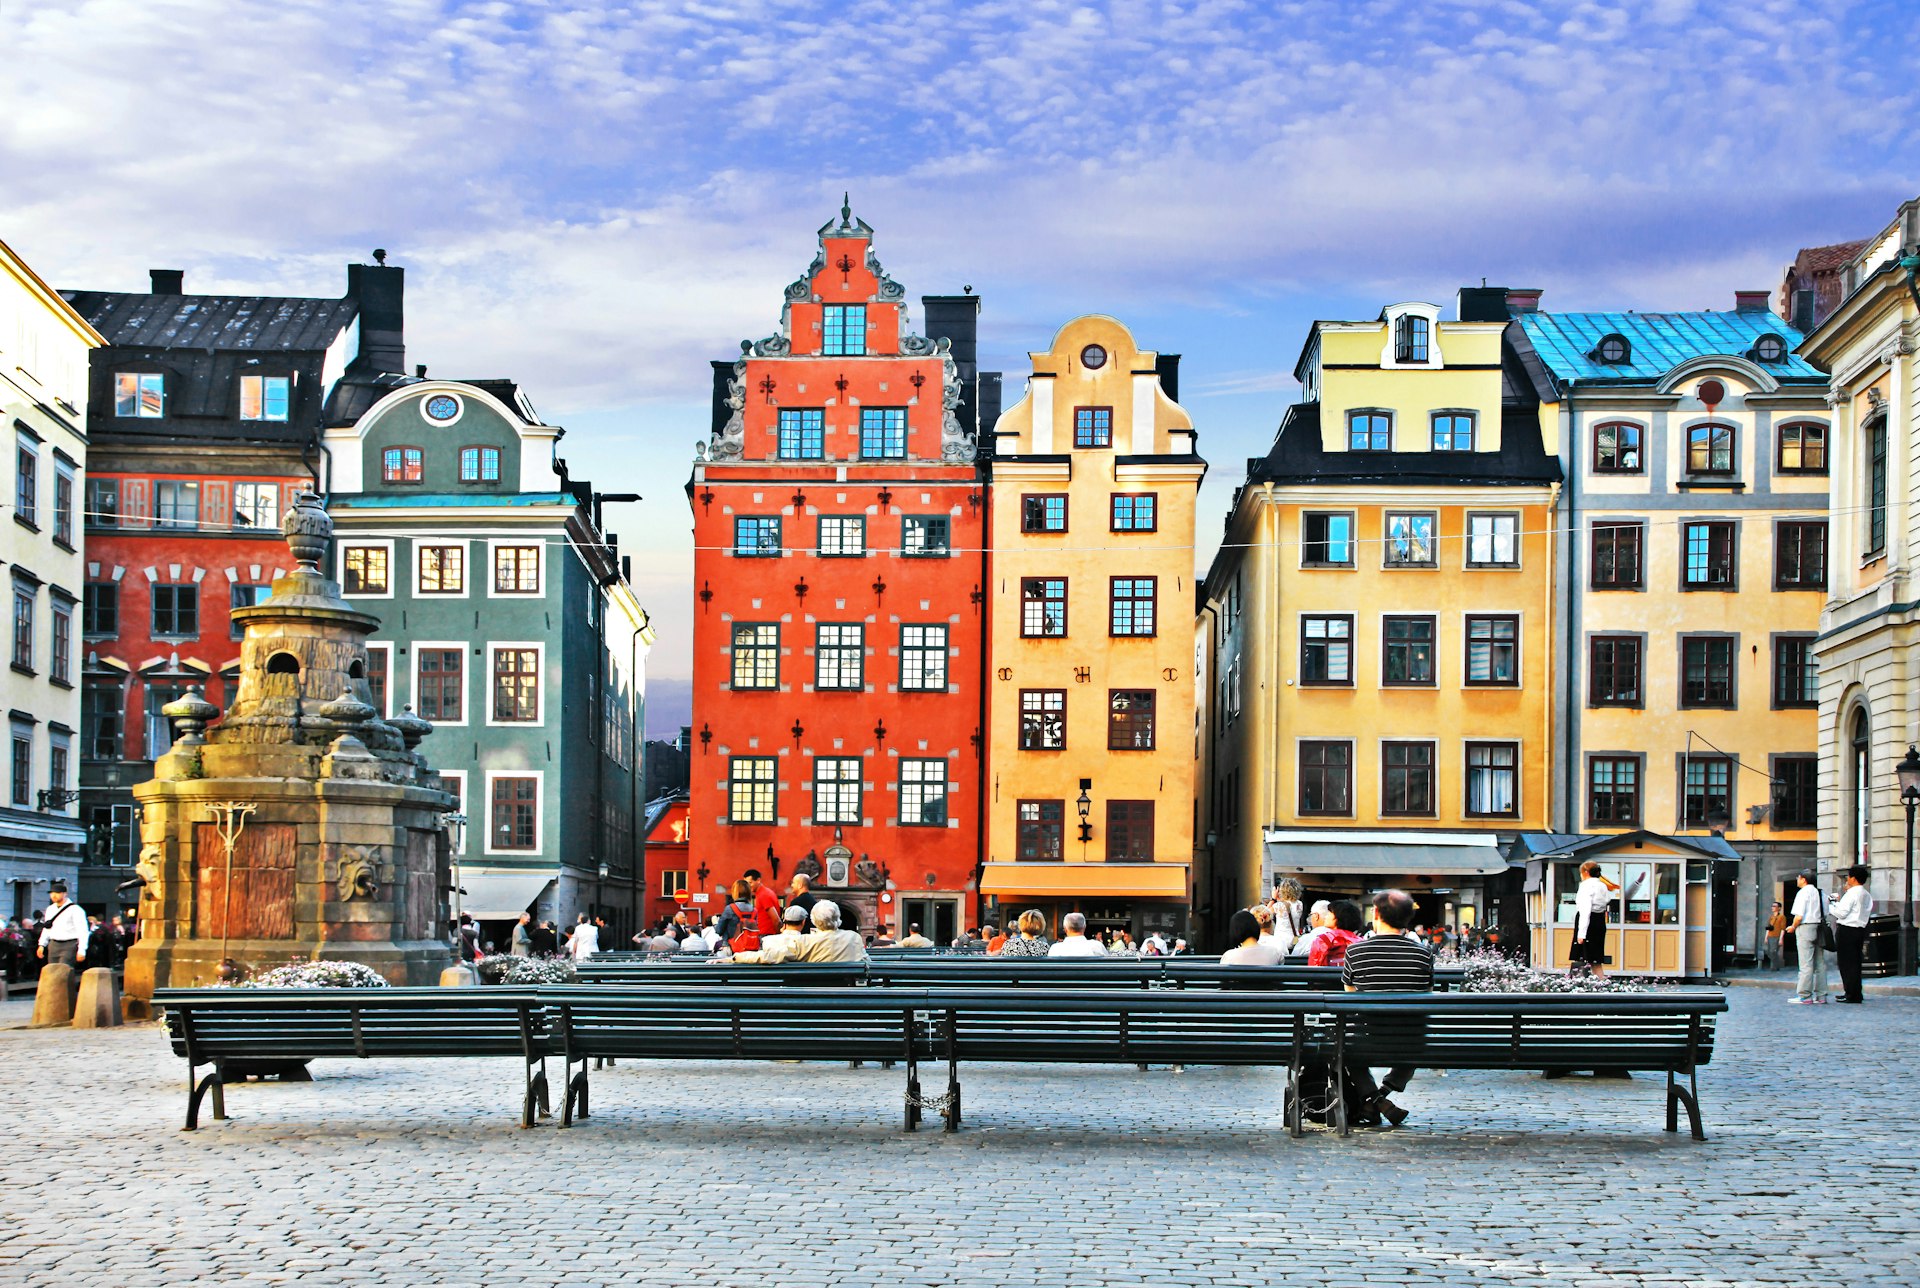 The colorful buildings in Stockholm's old town